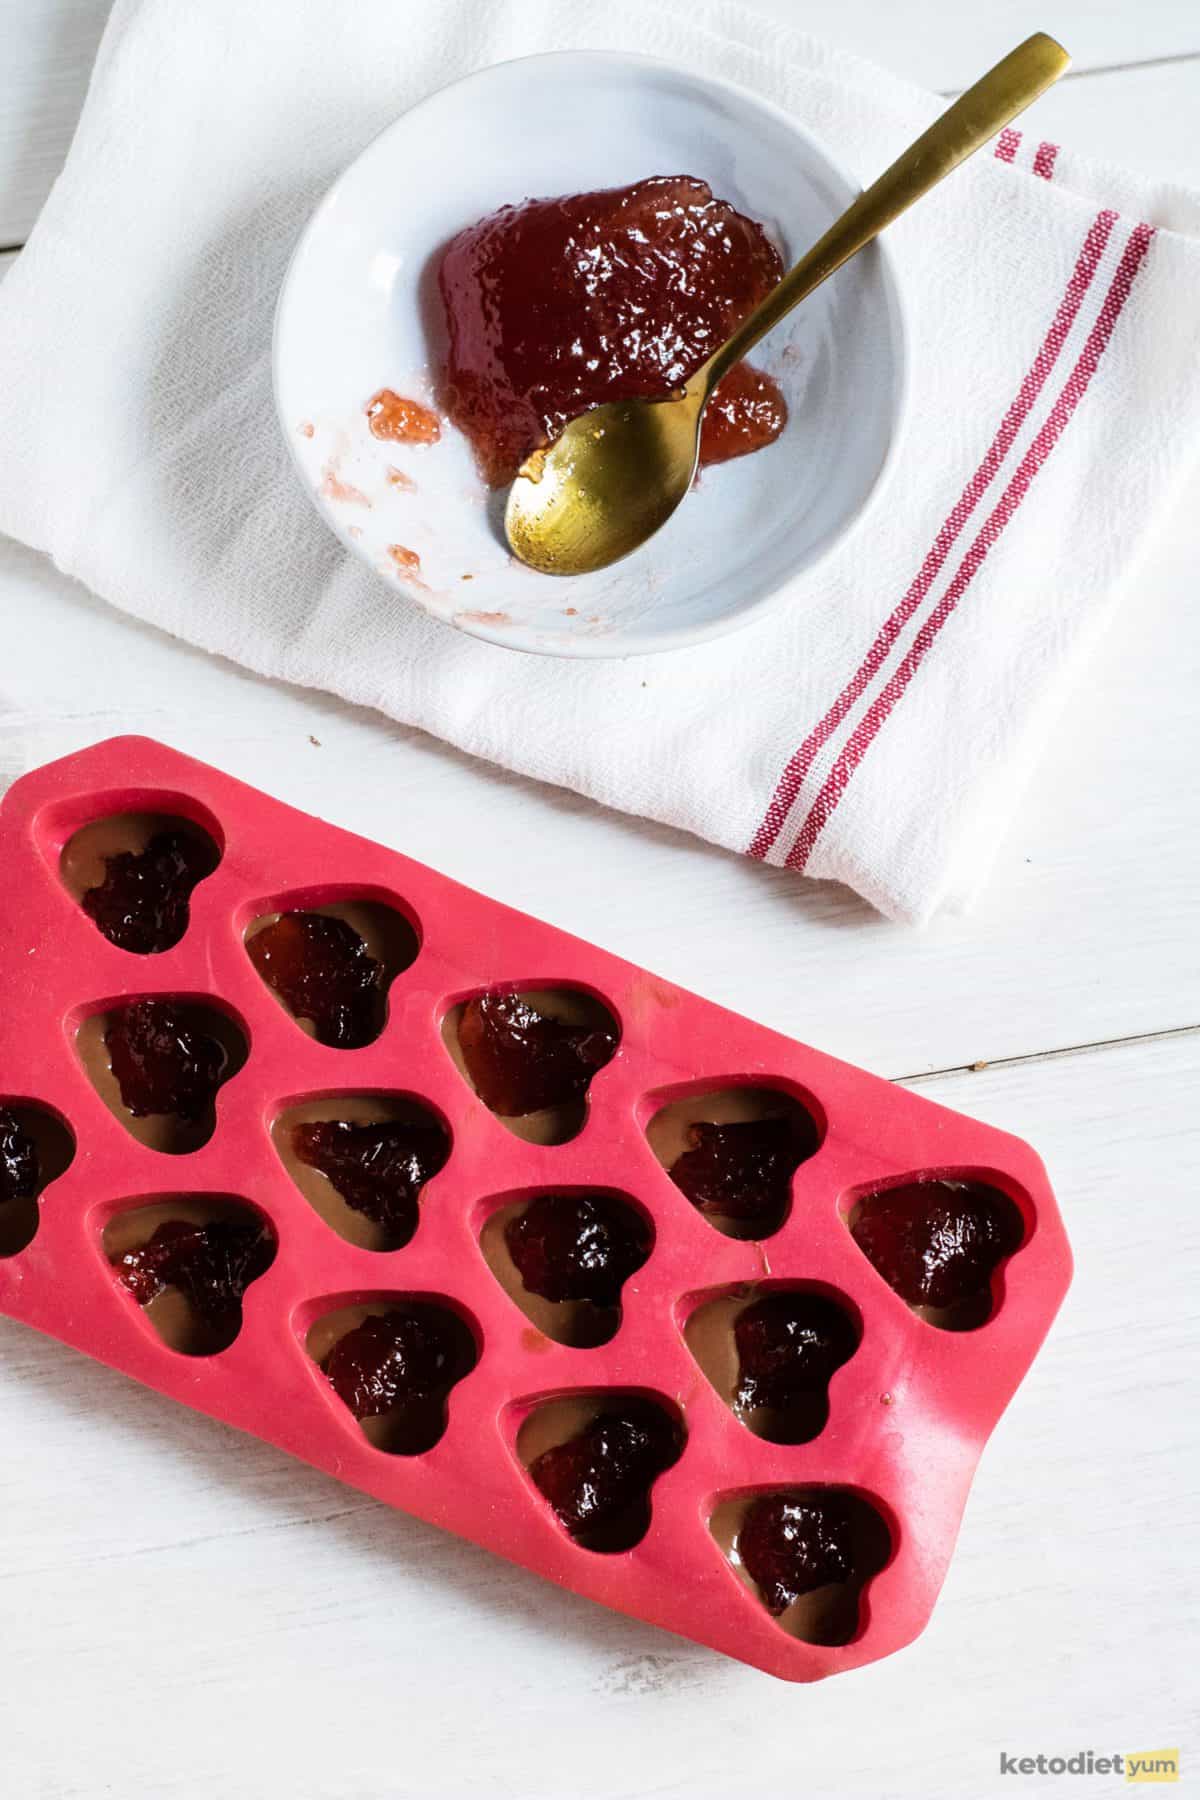 Adding strawberry jelly to the center of each chocolate heart